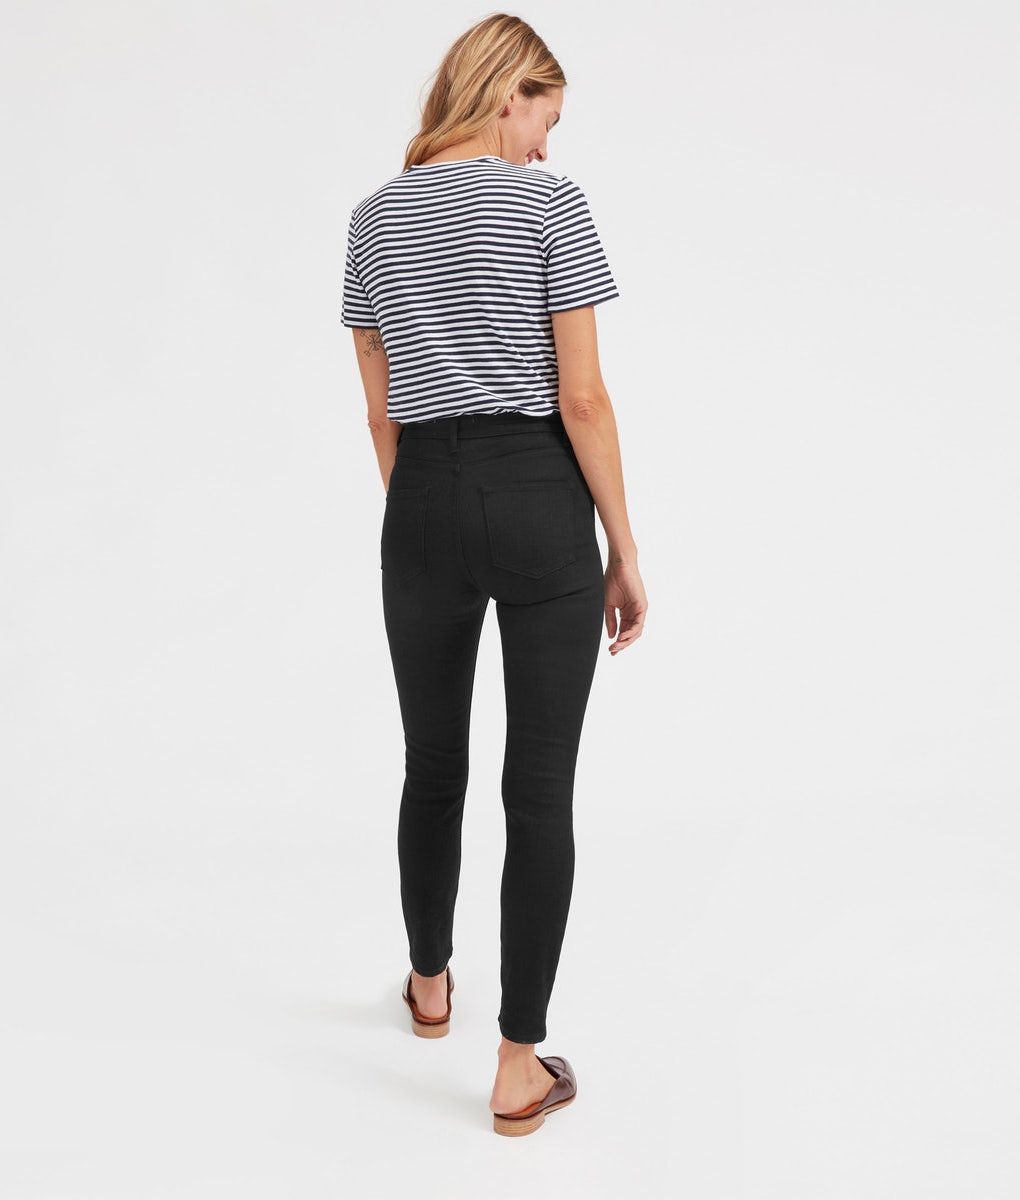 A model wearing black skinny jeans and a striped T-shirt